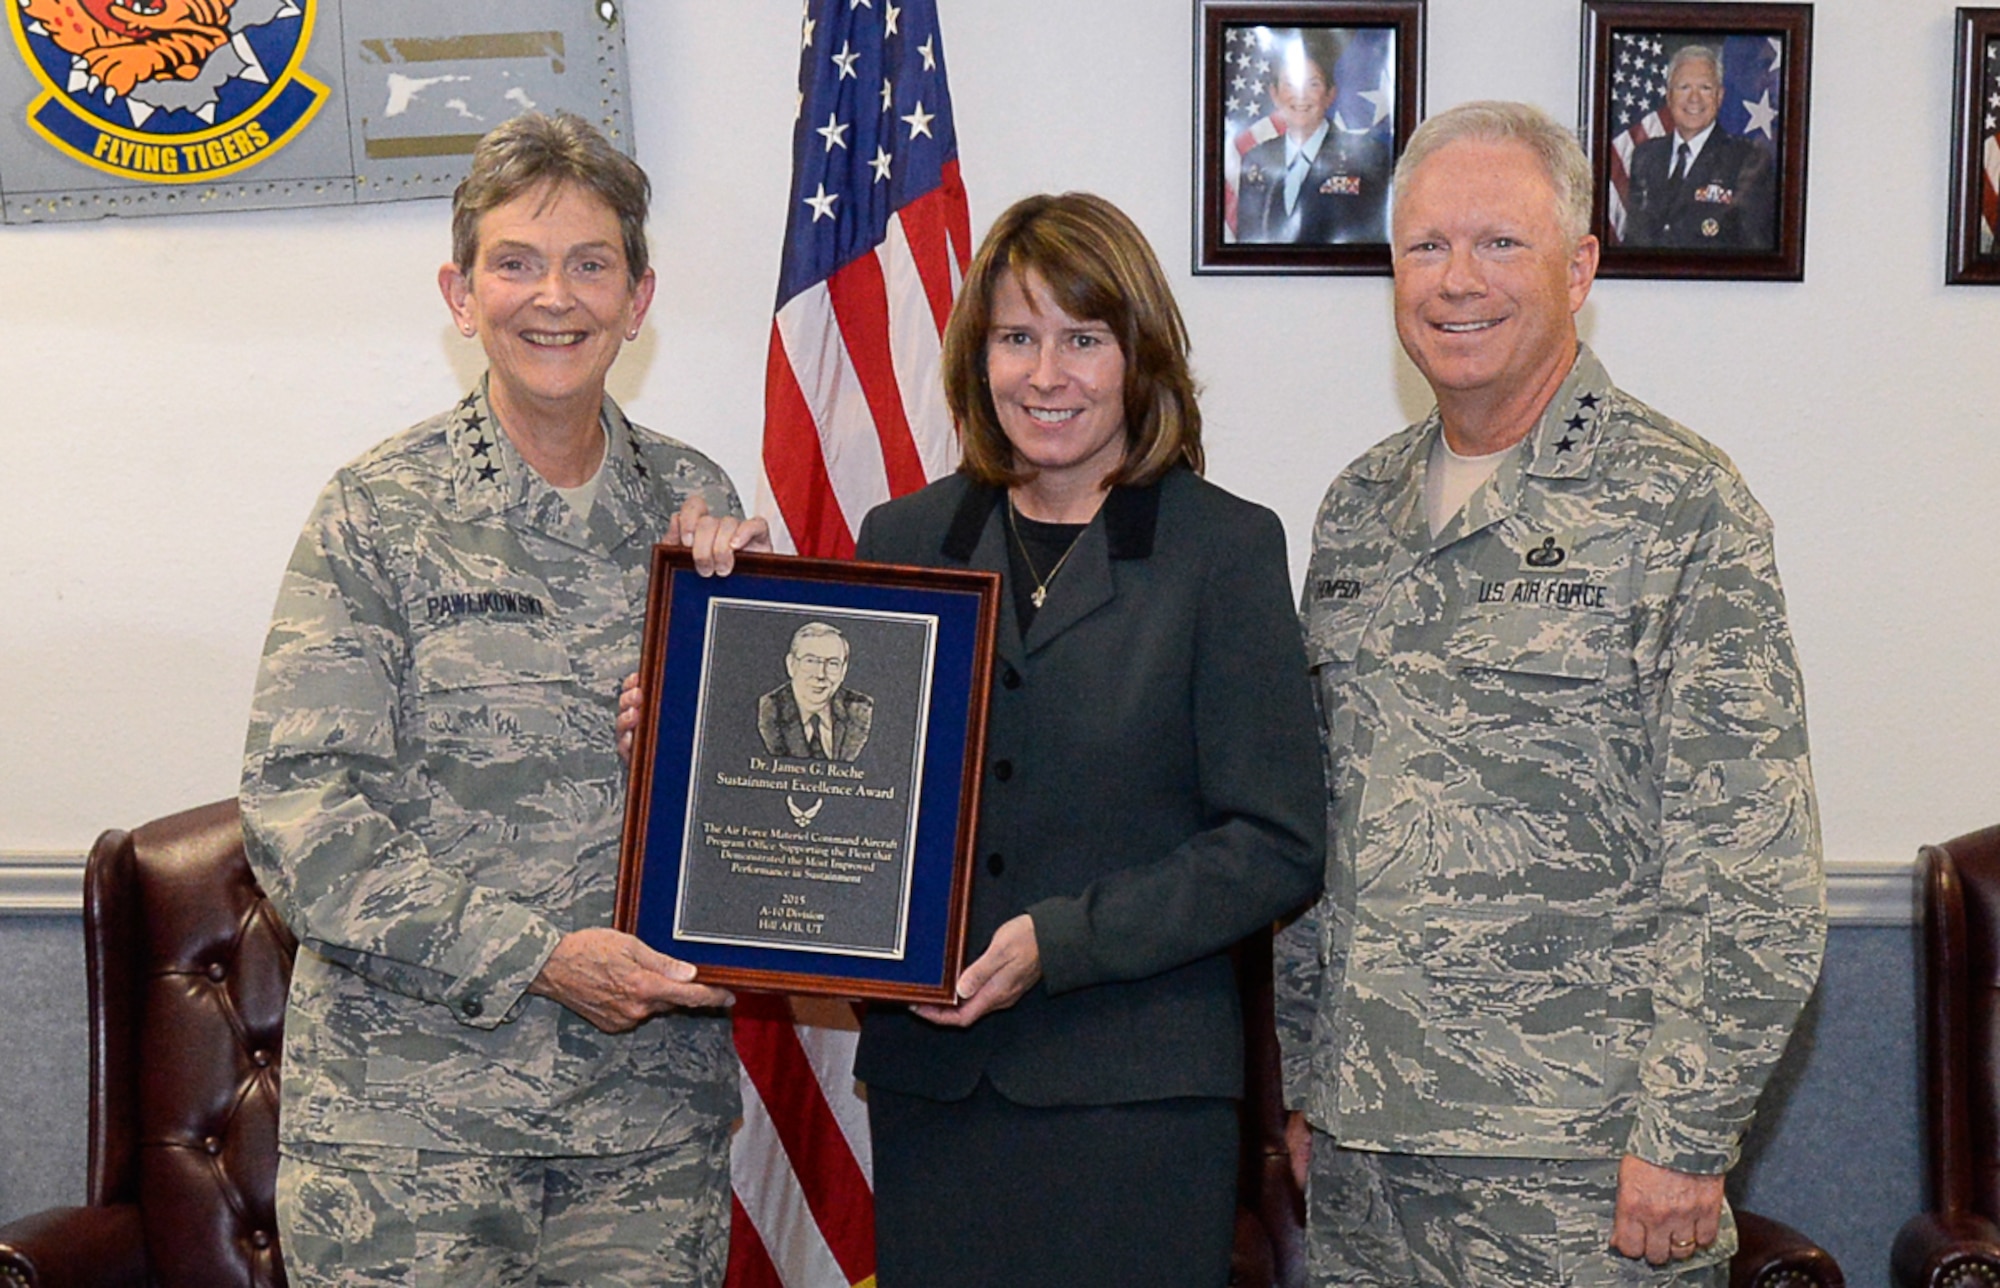 Gen. Ellen Pawlikowski, Air Force Materiel Command commander, presents the 2015 Dr. James G. Roche Sustainment Excellence Award to Dawn Sutton, A-10 System Program Office team leader, Aug. 31 during a meeting of AFMC leaders at Hill AFB.  Also pictured is Lt. Gen. John Thompson, Air Force Life Cycle Management Center commander. The award is presented annually based upon objective criteria to the AFMC program office with the most improved performance in fleet sustainment during the given fiscal year.  (U.S. Air Force photo by Todd Cromar)